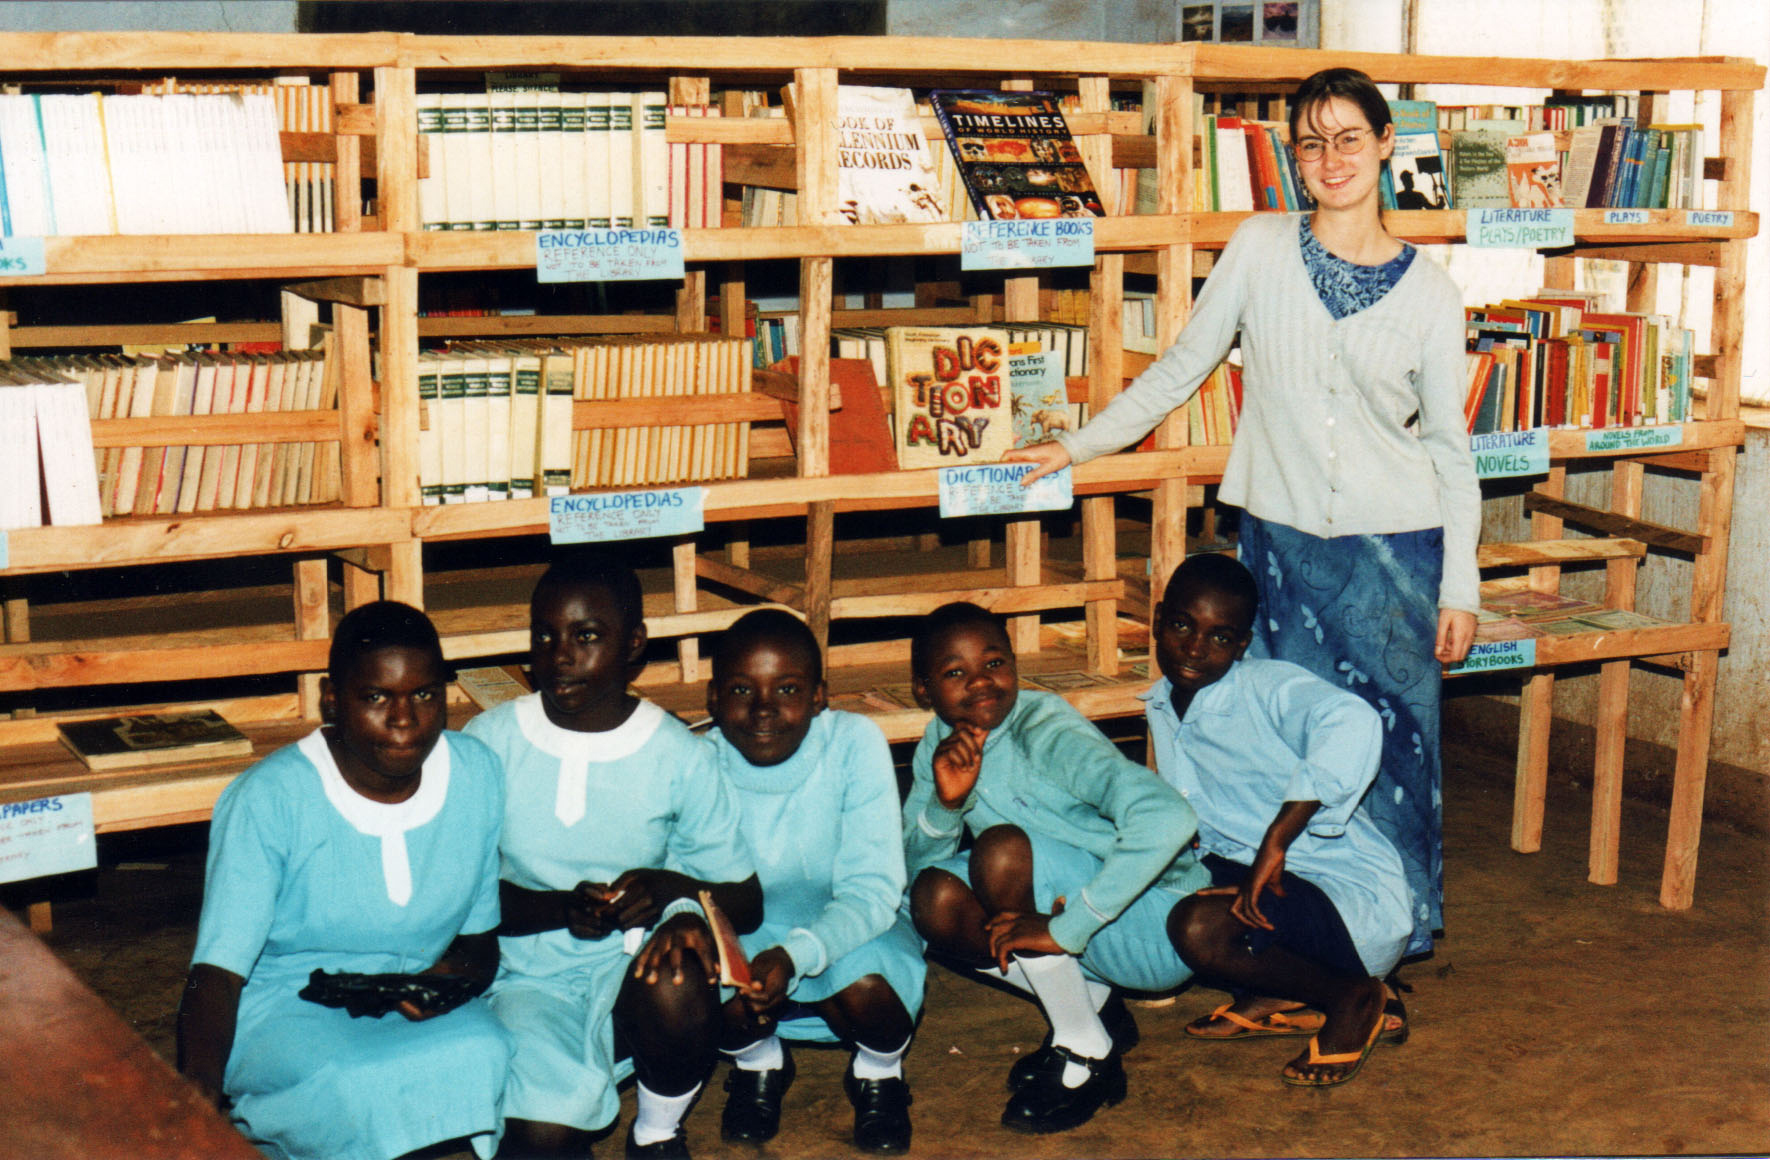 Victoria and students setting up the library in PSS Nkambe, Cameroon